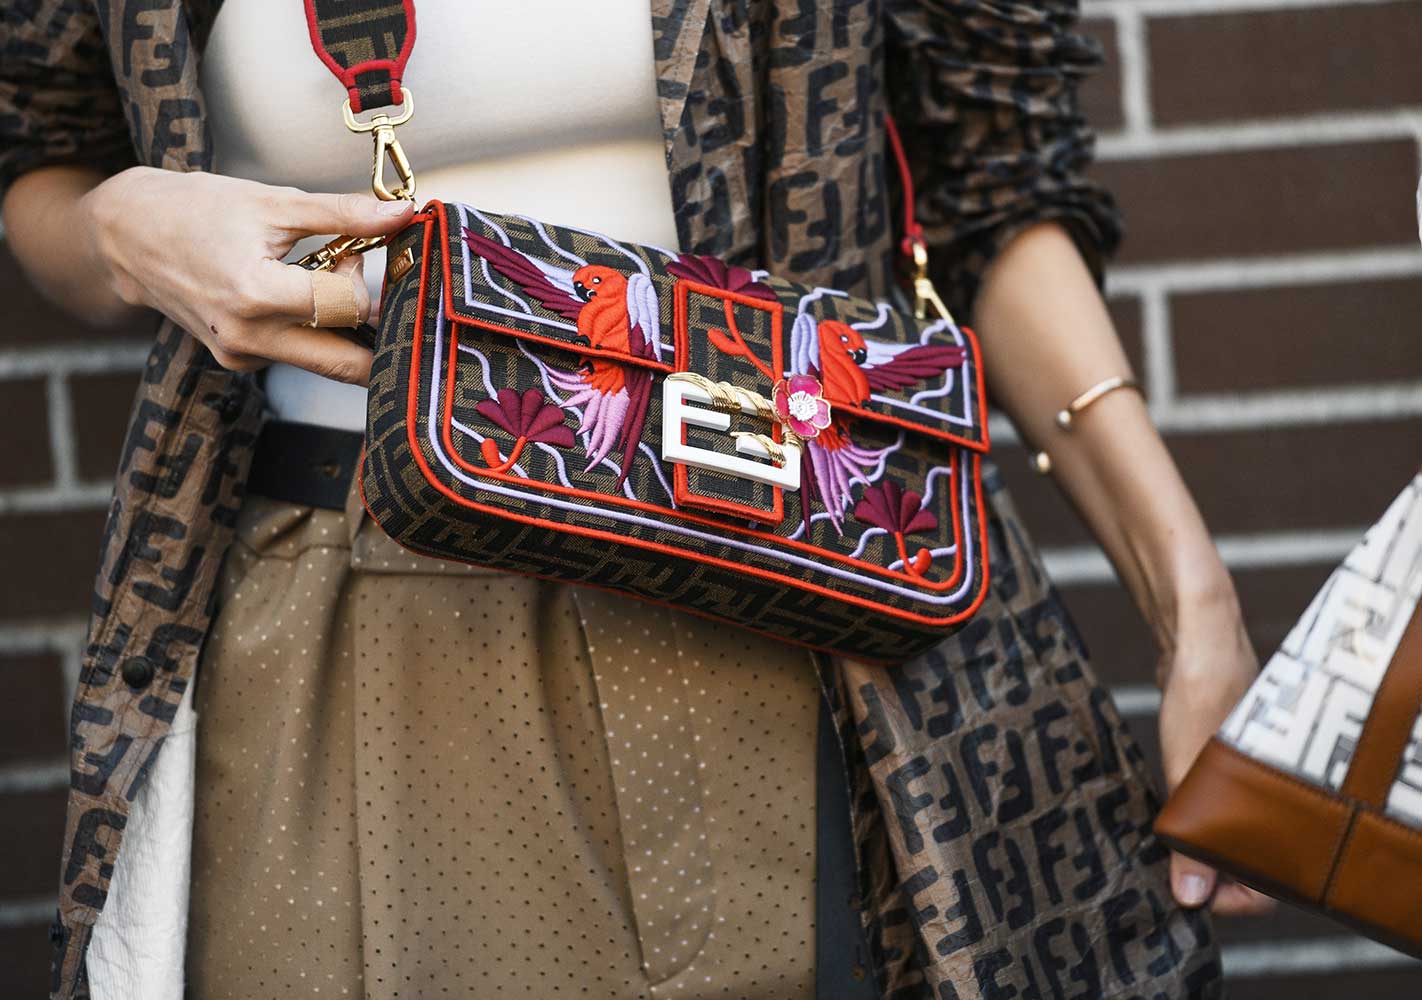 The 2000s are back: these designer bags are now hip again!